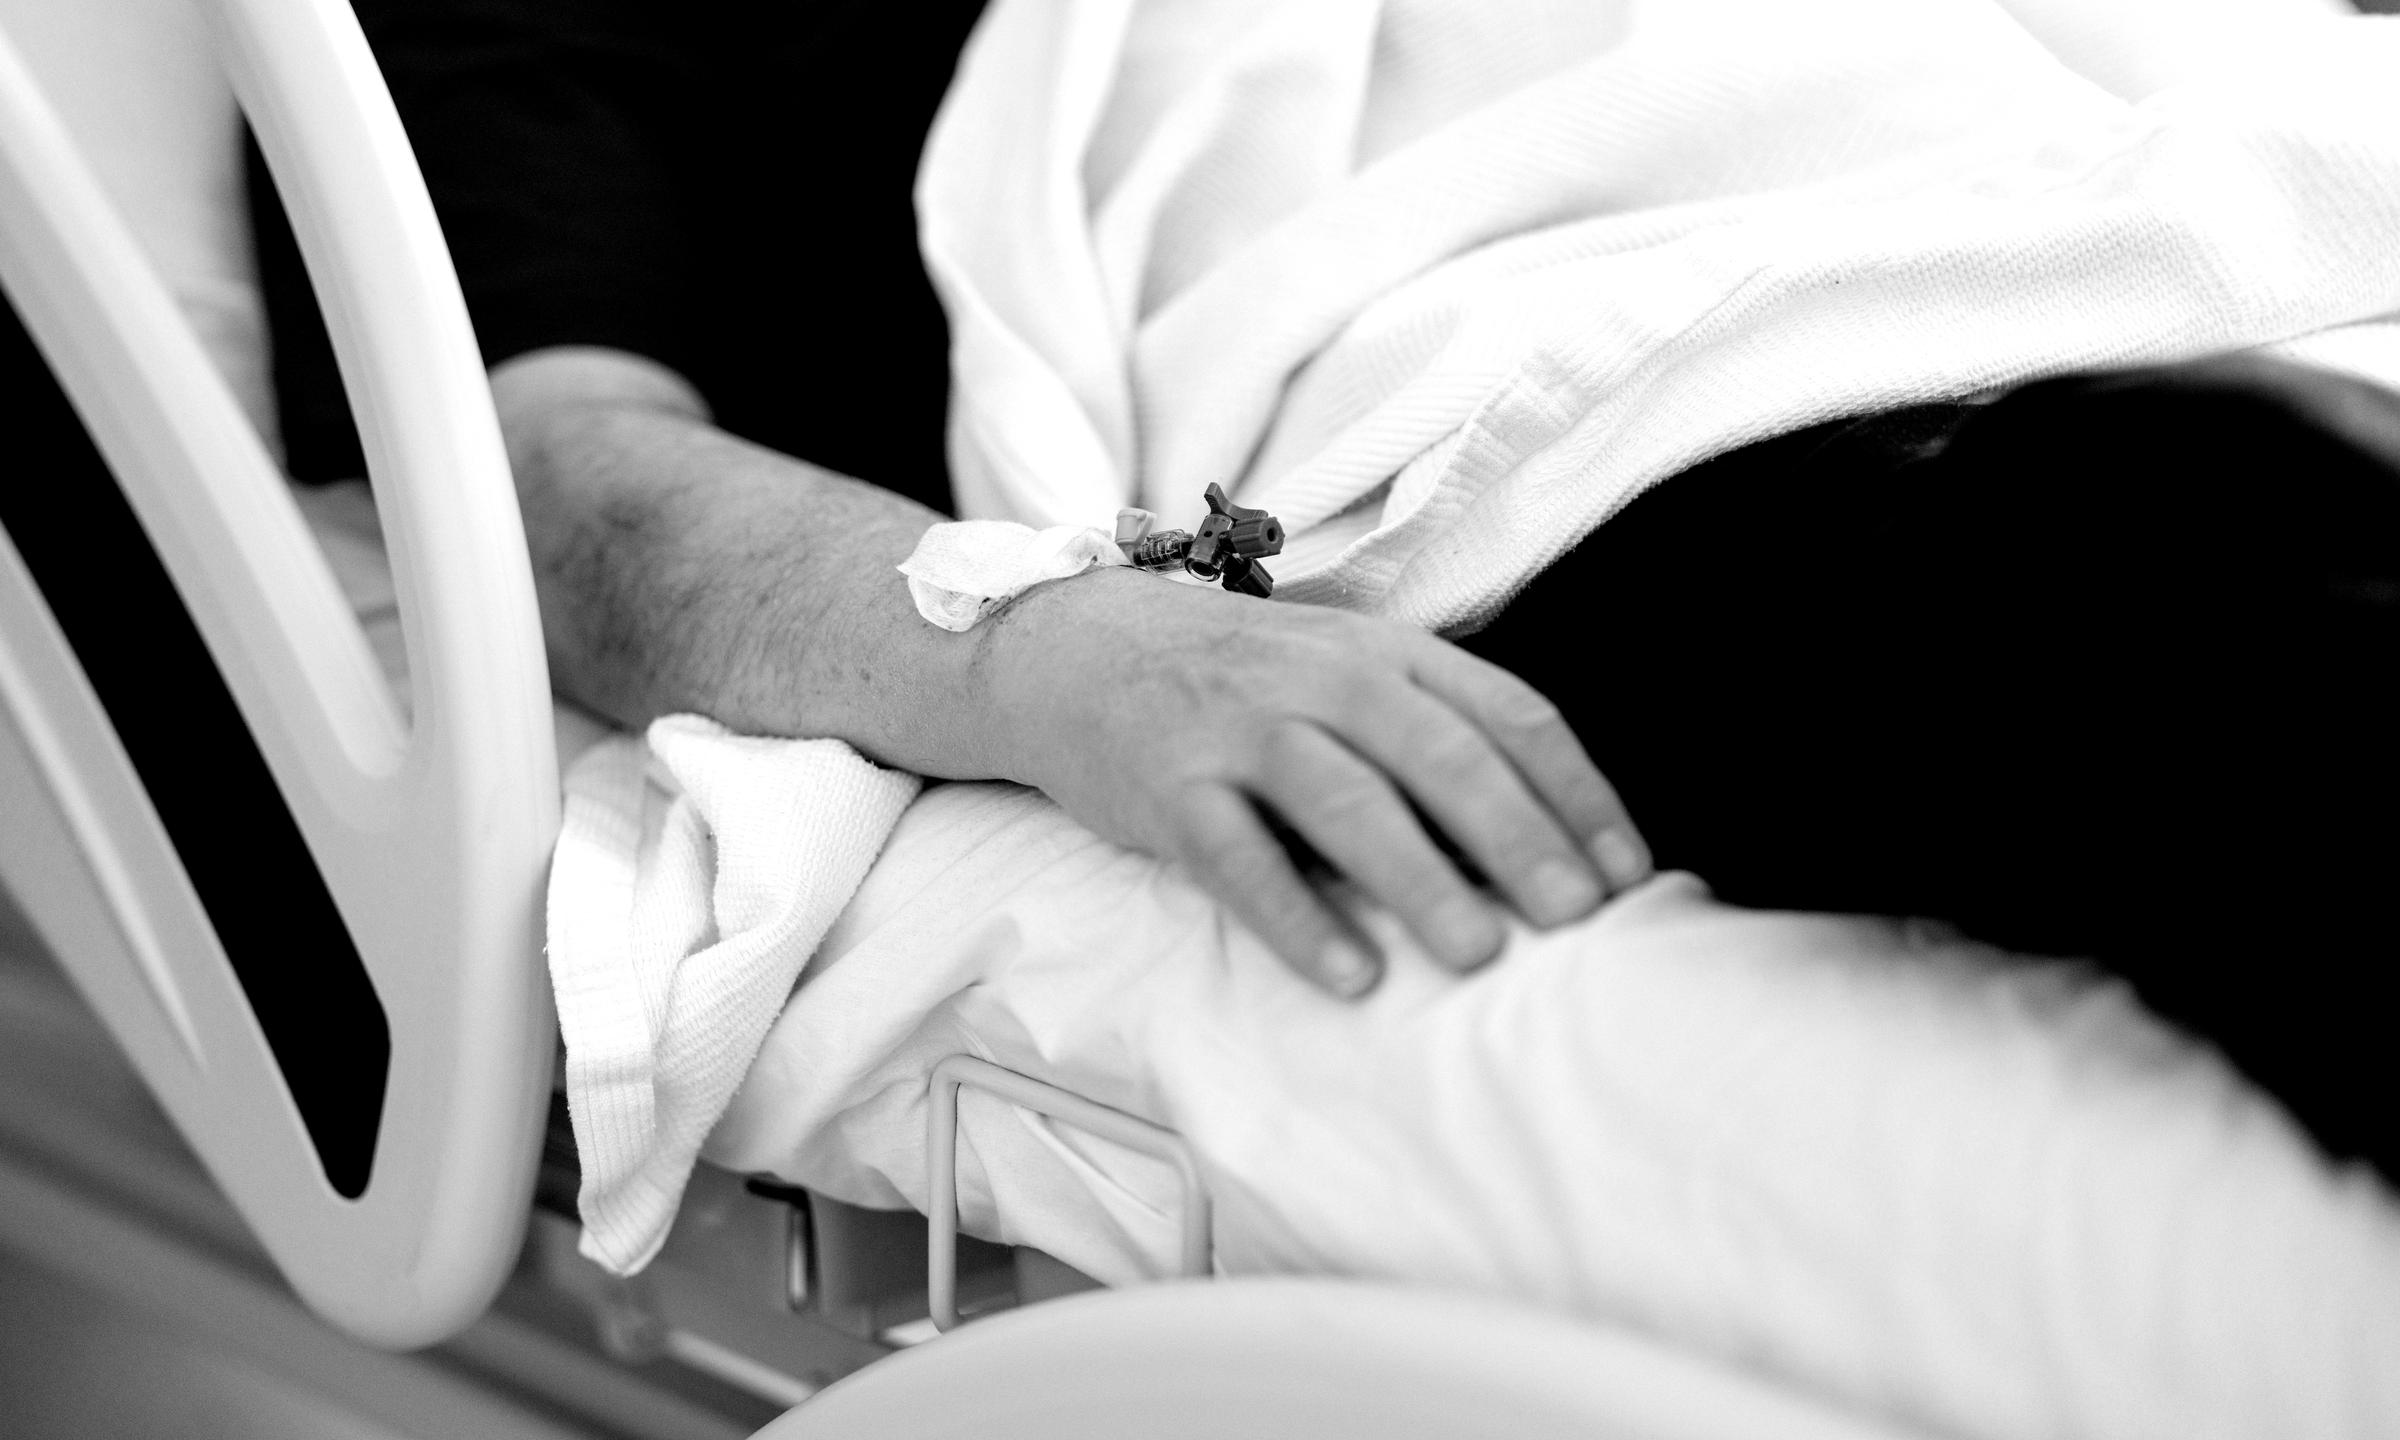 An apparently comatose figure in a hospital bed | Source: Pexels